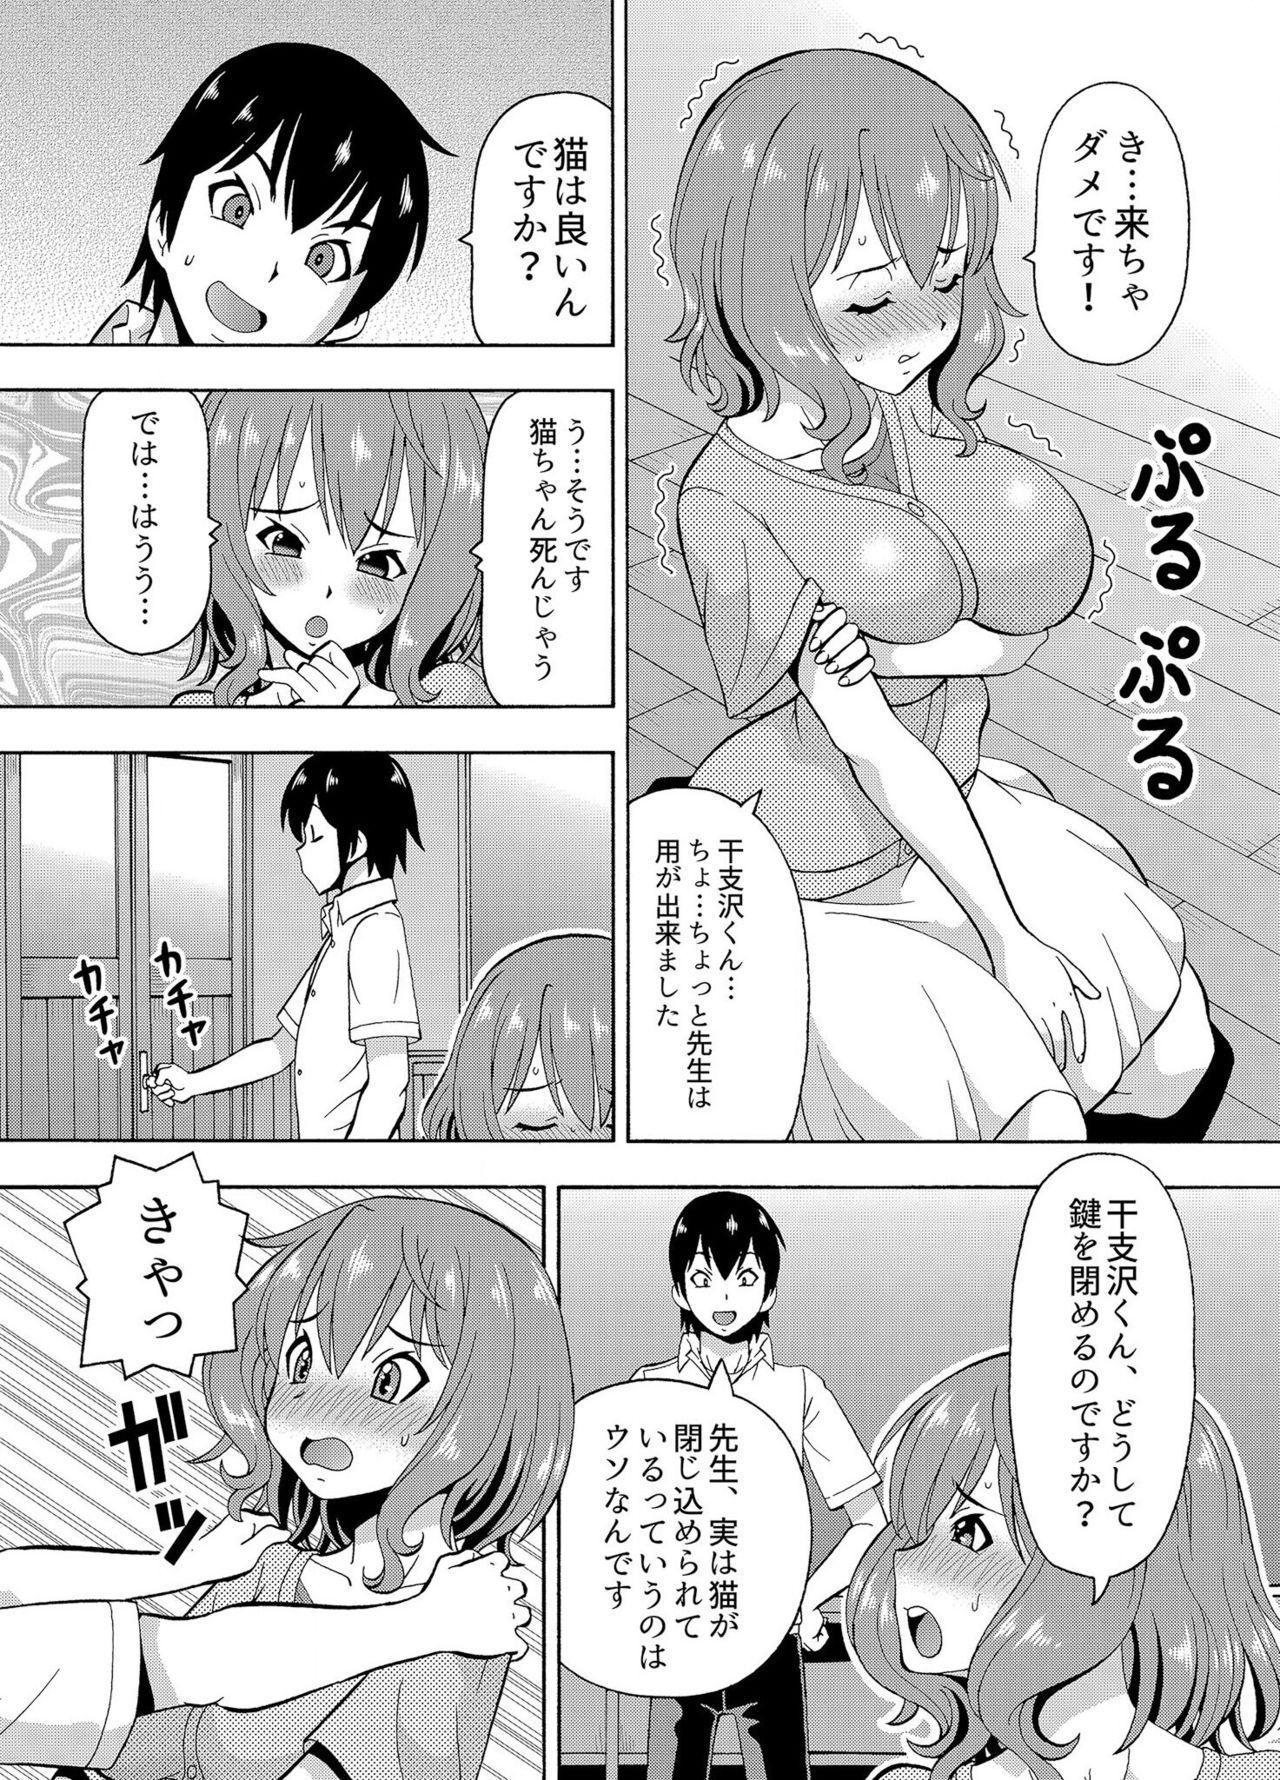 Friend [薔薇色の日々] パラメータ・リモコン -あの娘のアソコを簡単操作！？-（4） Amateur - Page 9